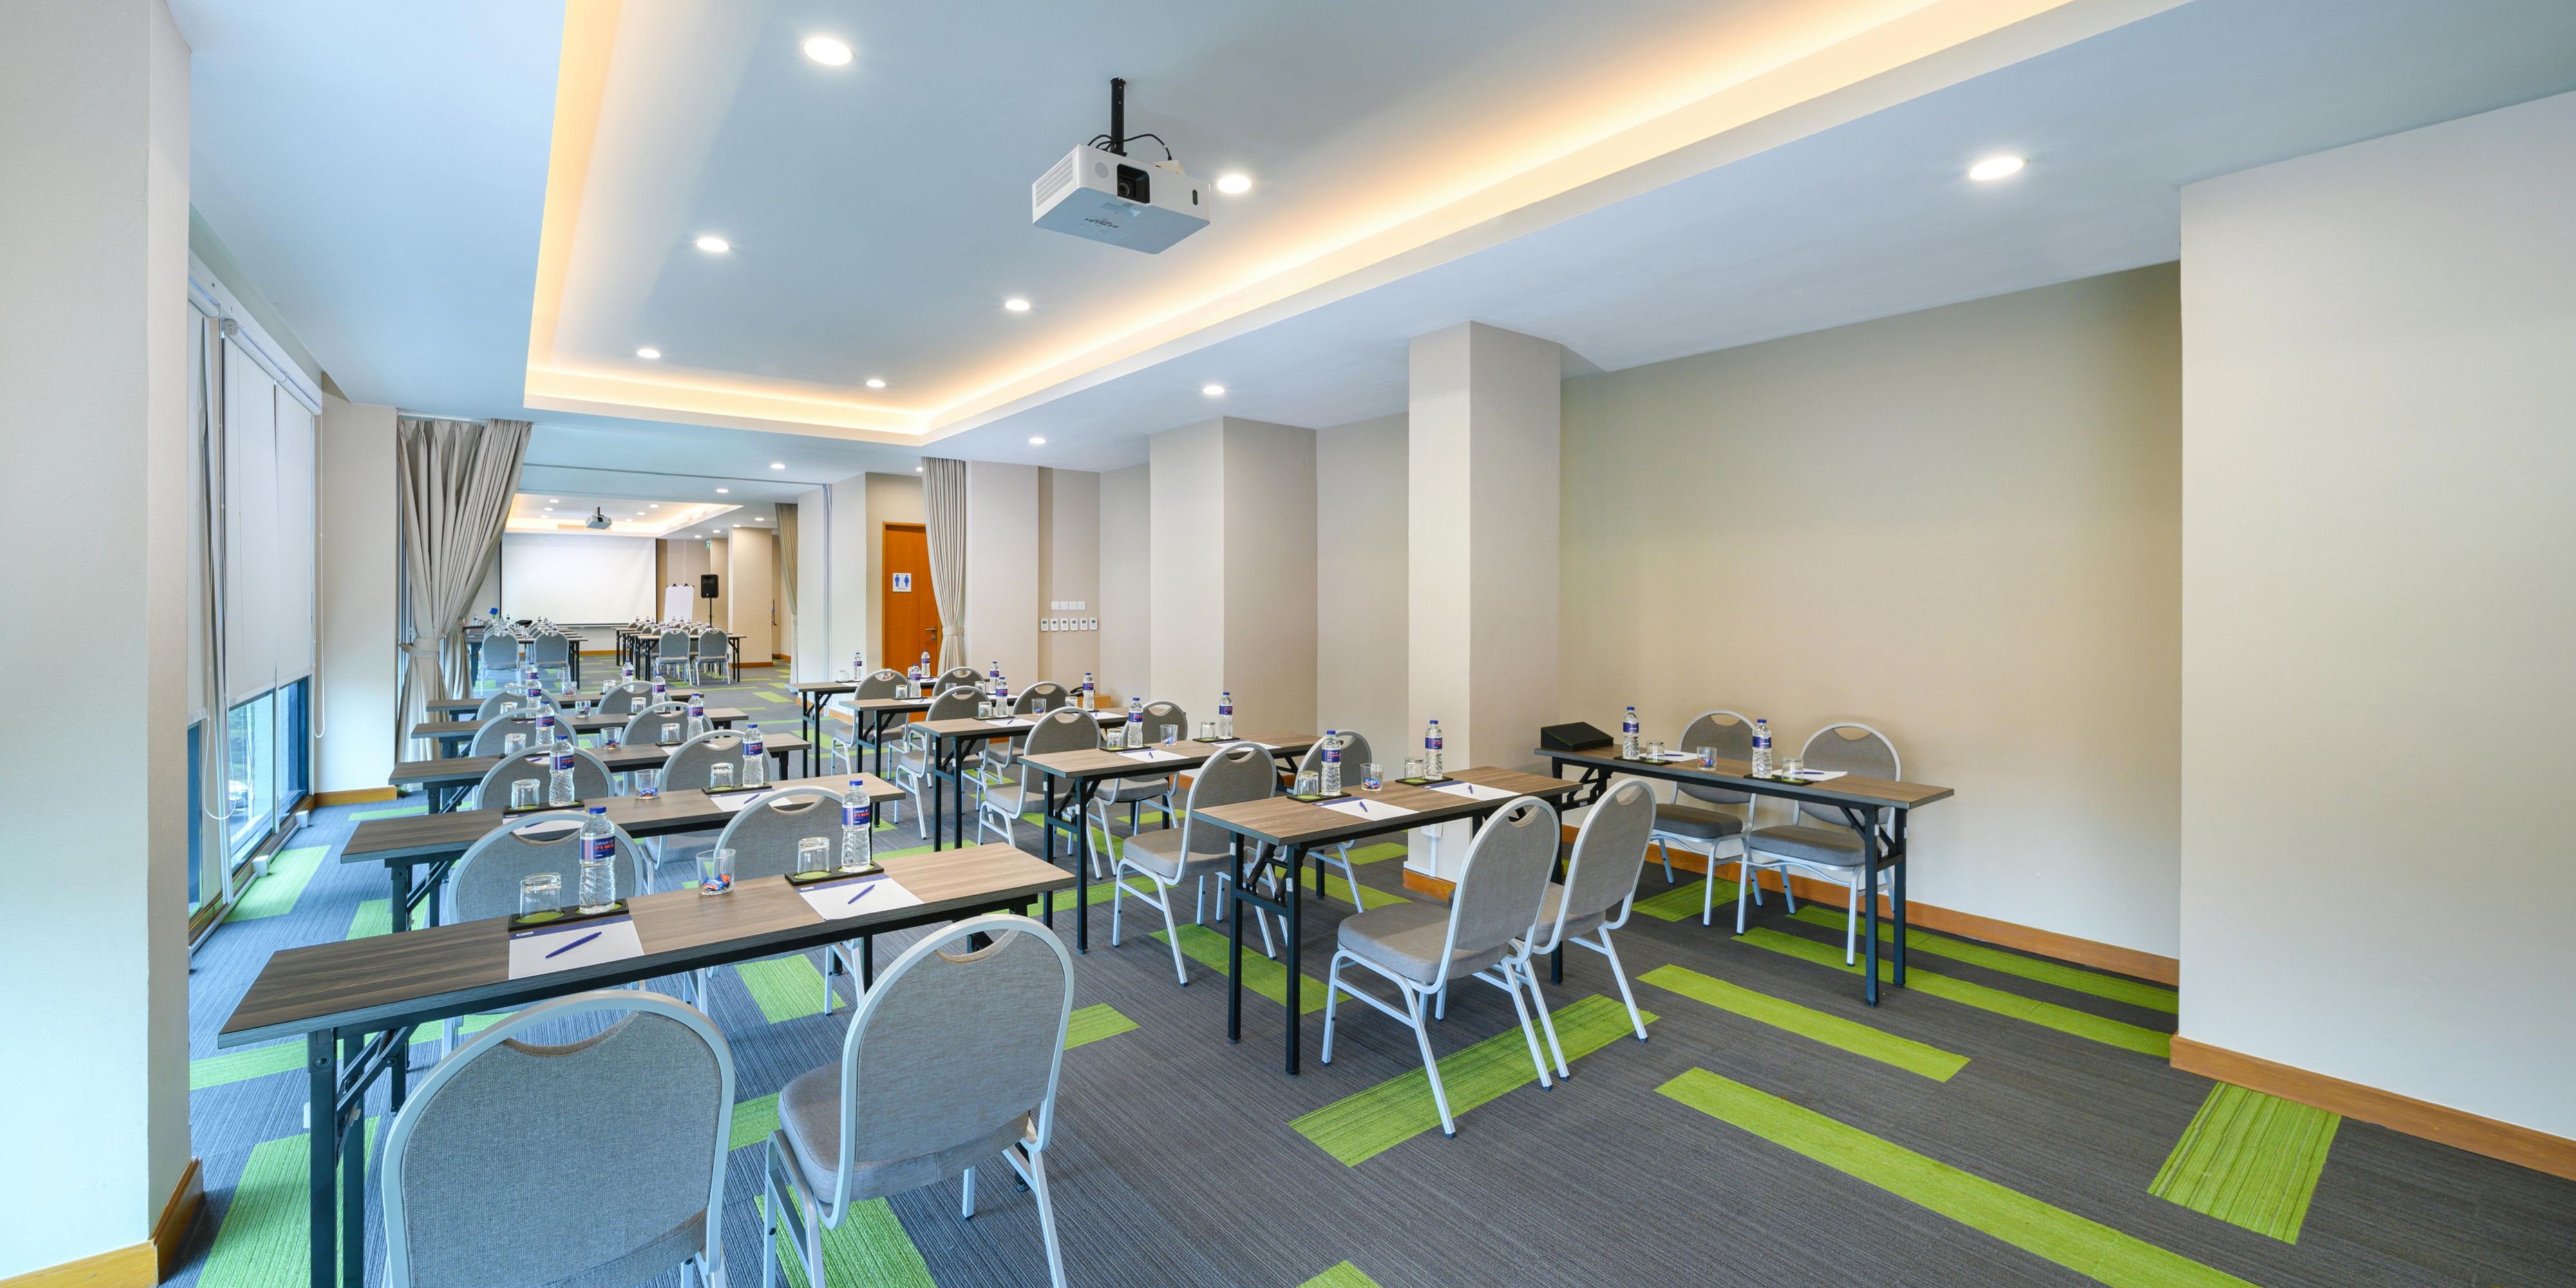 We can host your small meetings & banquets according to your needs. Holiday Inn Express Jakarta Matraman has one meeting room located on first floor with 45 sqm size and could accommodate up to 140 pax in theatre styles.